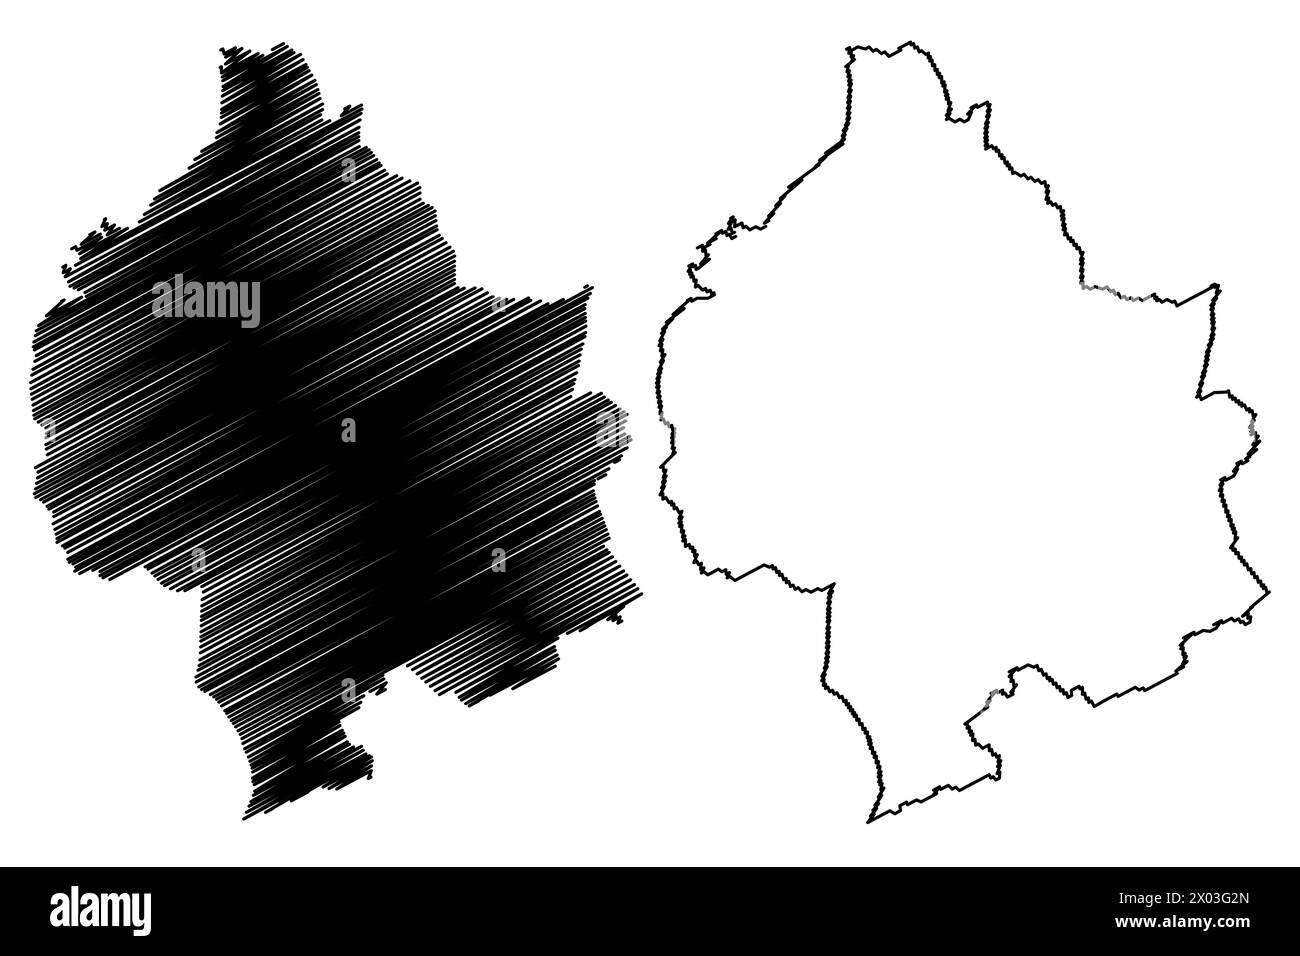 Sissach District (Switzerland, Swiss Confederation, Canton of Basel-Landschaft or Basel-Country, Baselland or Baselbiet) map vector illustration, scri Stock Vector